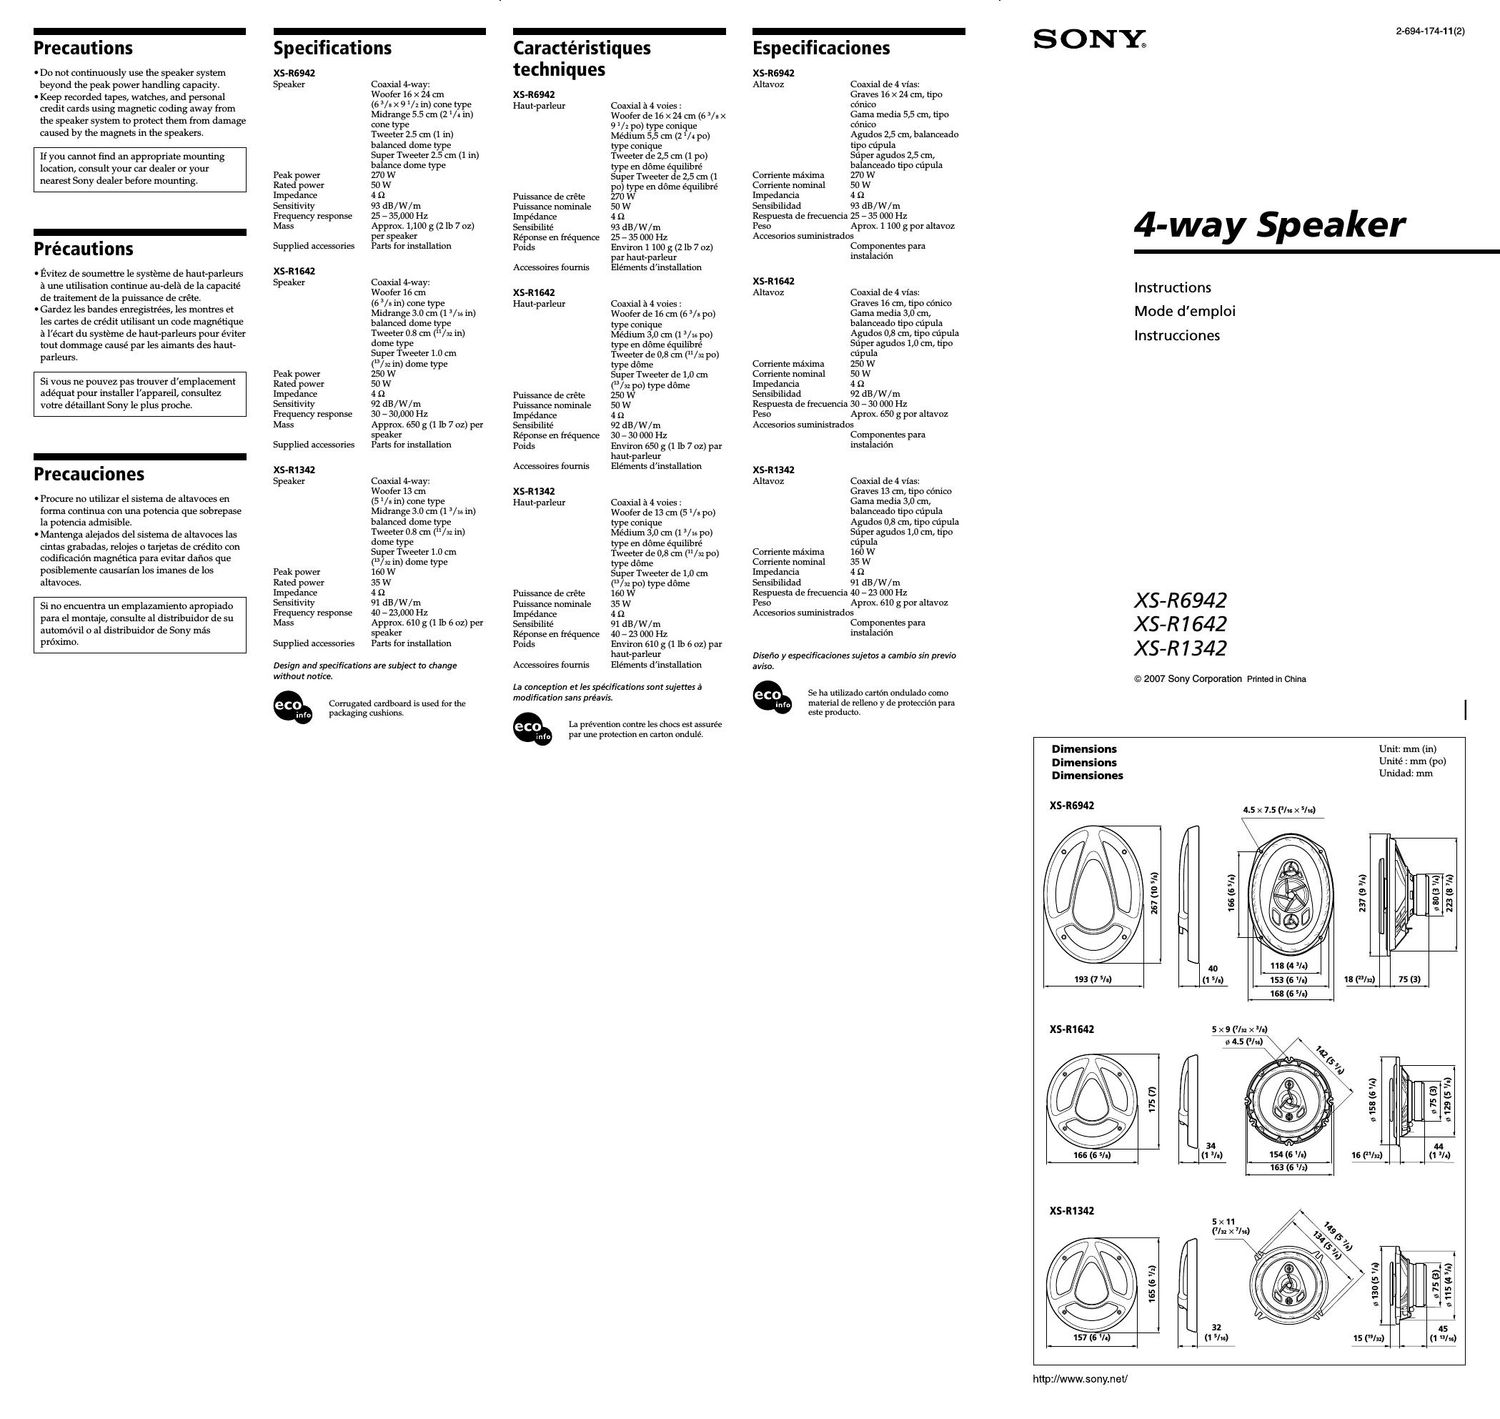 sony xs r 1342 owners manual